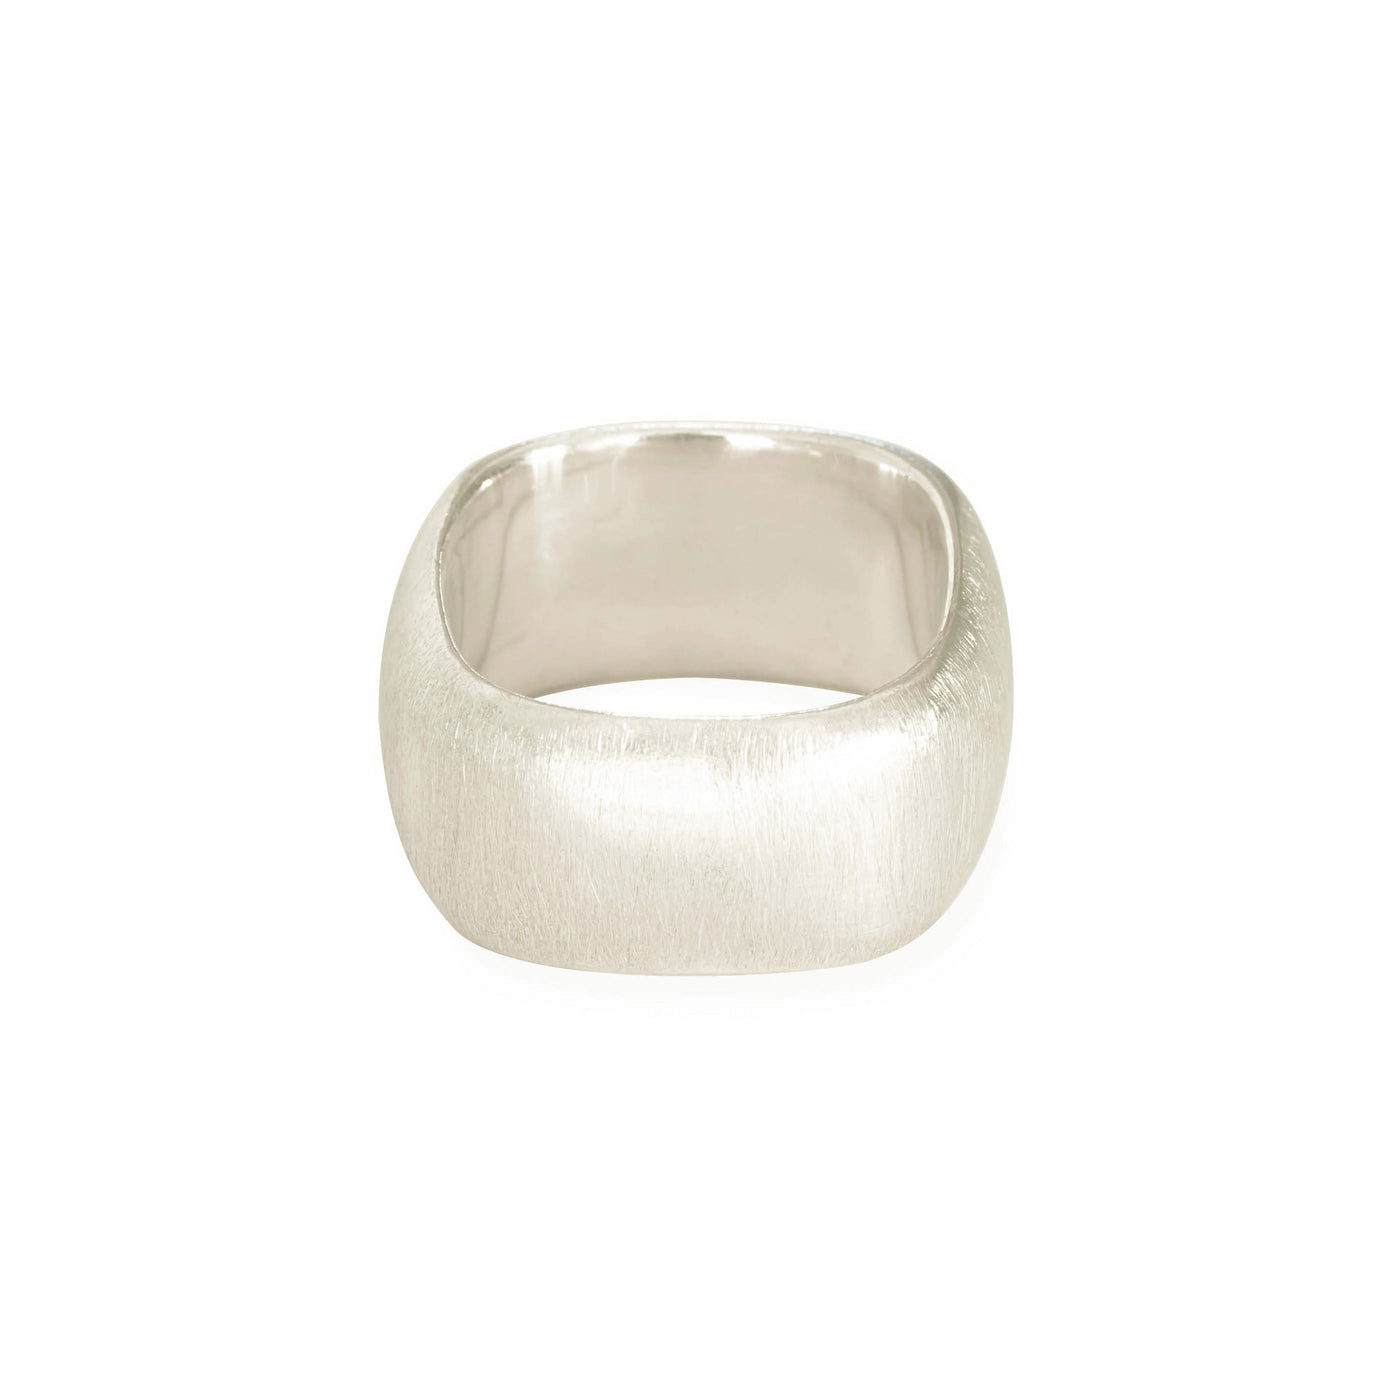 Eco-friendly silver ring. This artisan crafted Squared Band is handmade in Cape Town in recycled silver from e-waste.